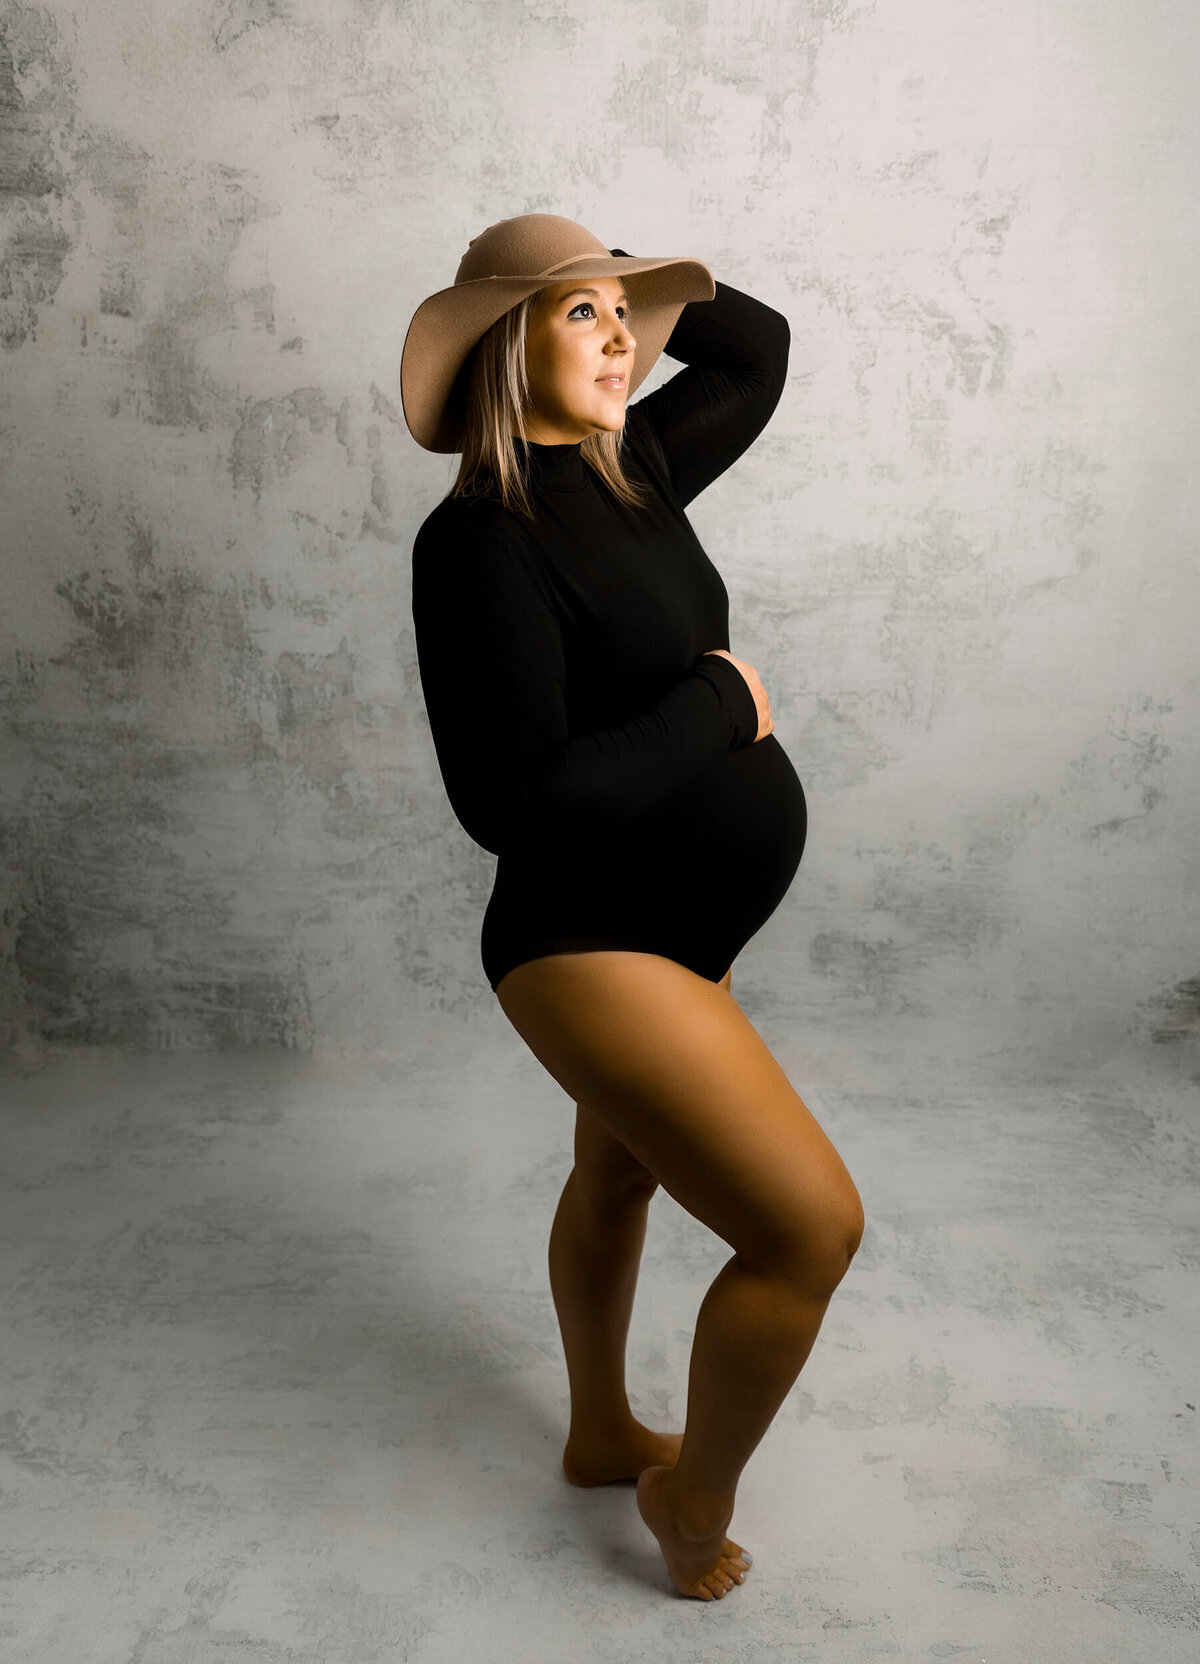 Erie Pa pregnant woman wearing a body suit and hat